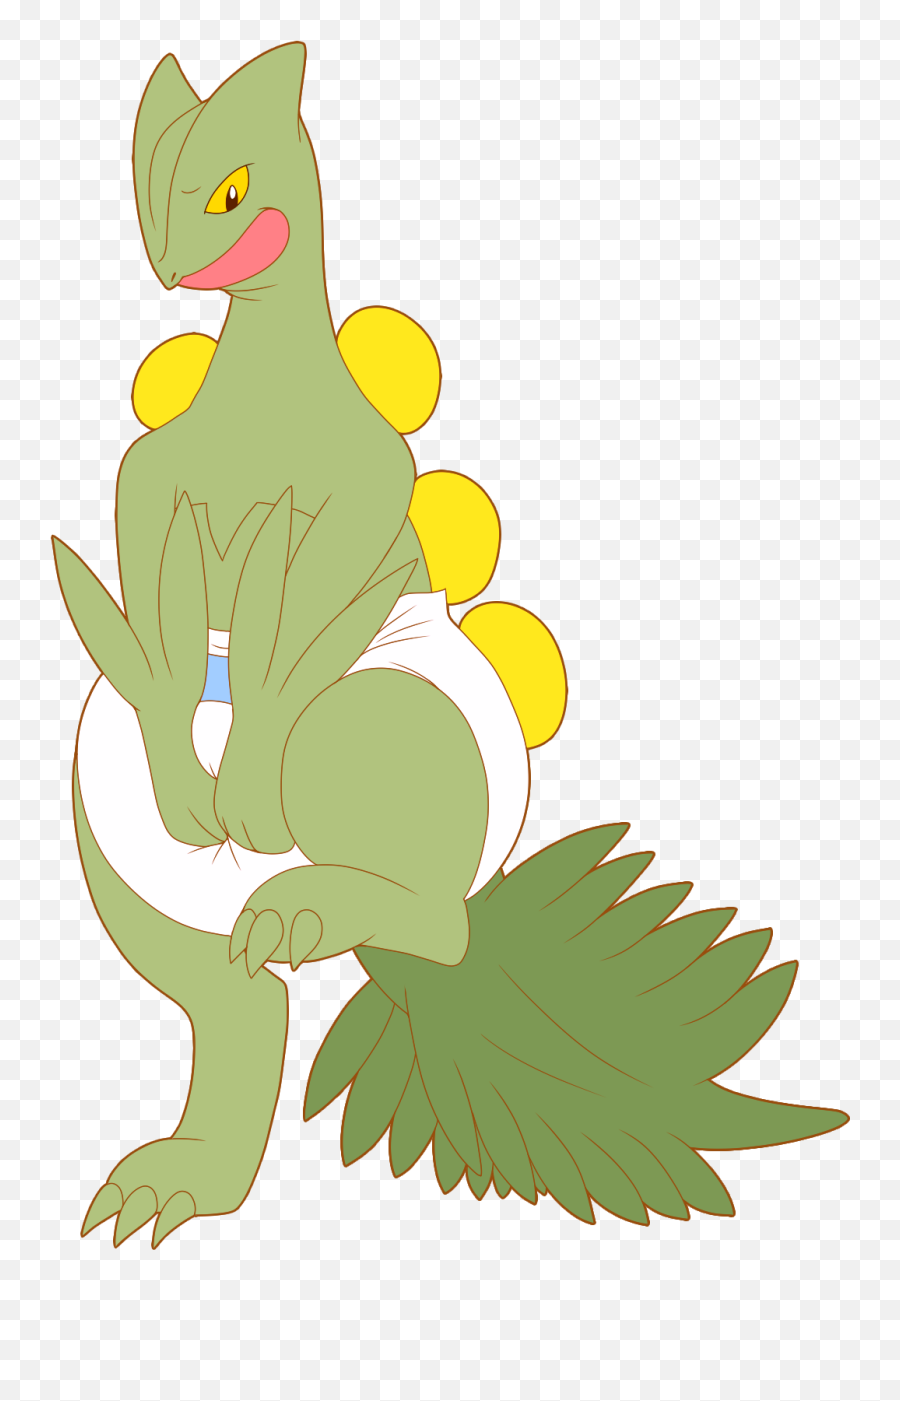 Scepu0027s Aching Bladder By Omegahaxors - Fur Affinity Dot Net Fictional Character Png,Sceptile Png